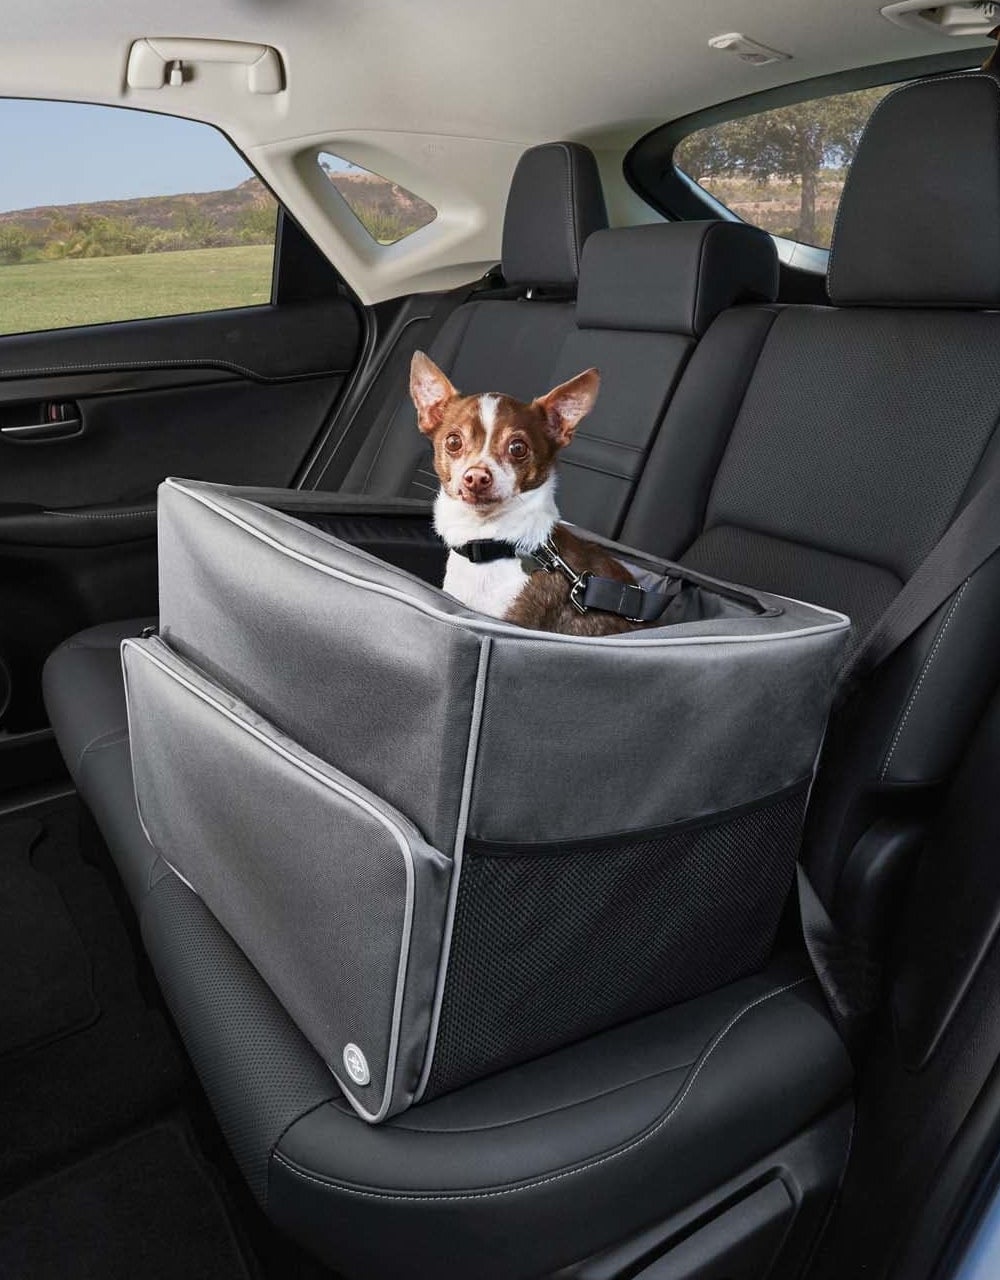 A small dog uses the gray booster seat in the back seat of an SUV